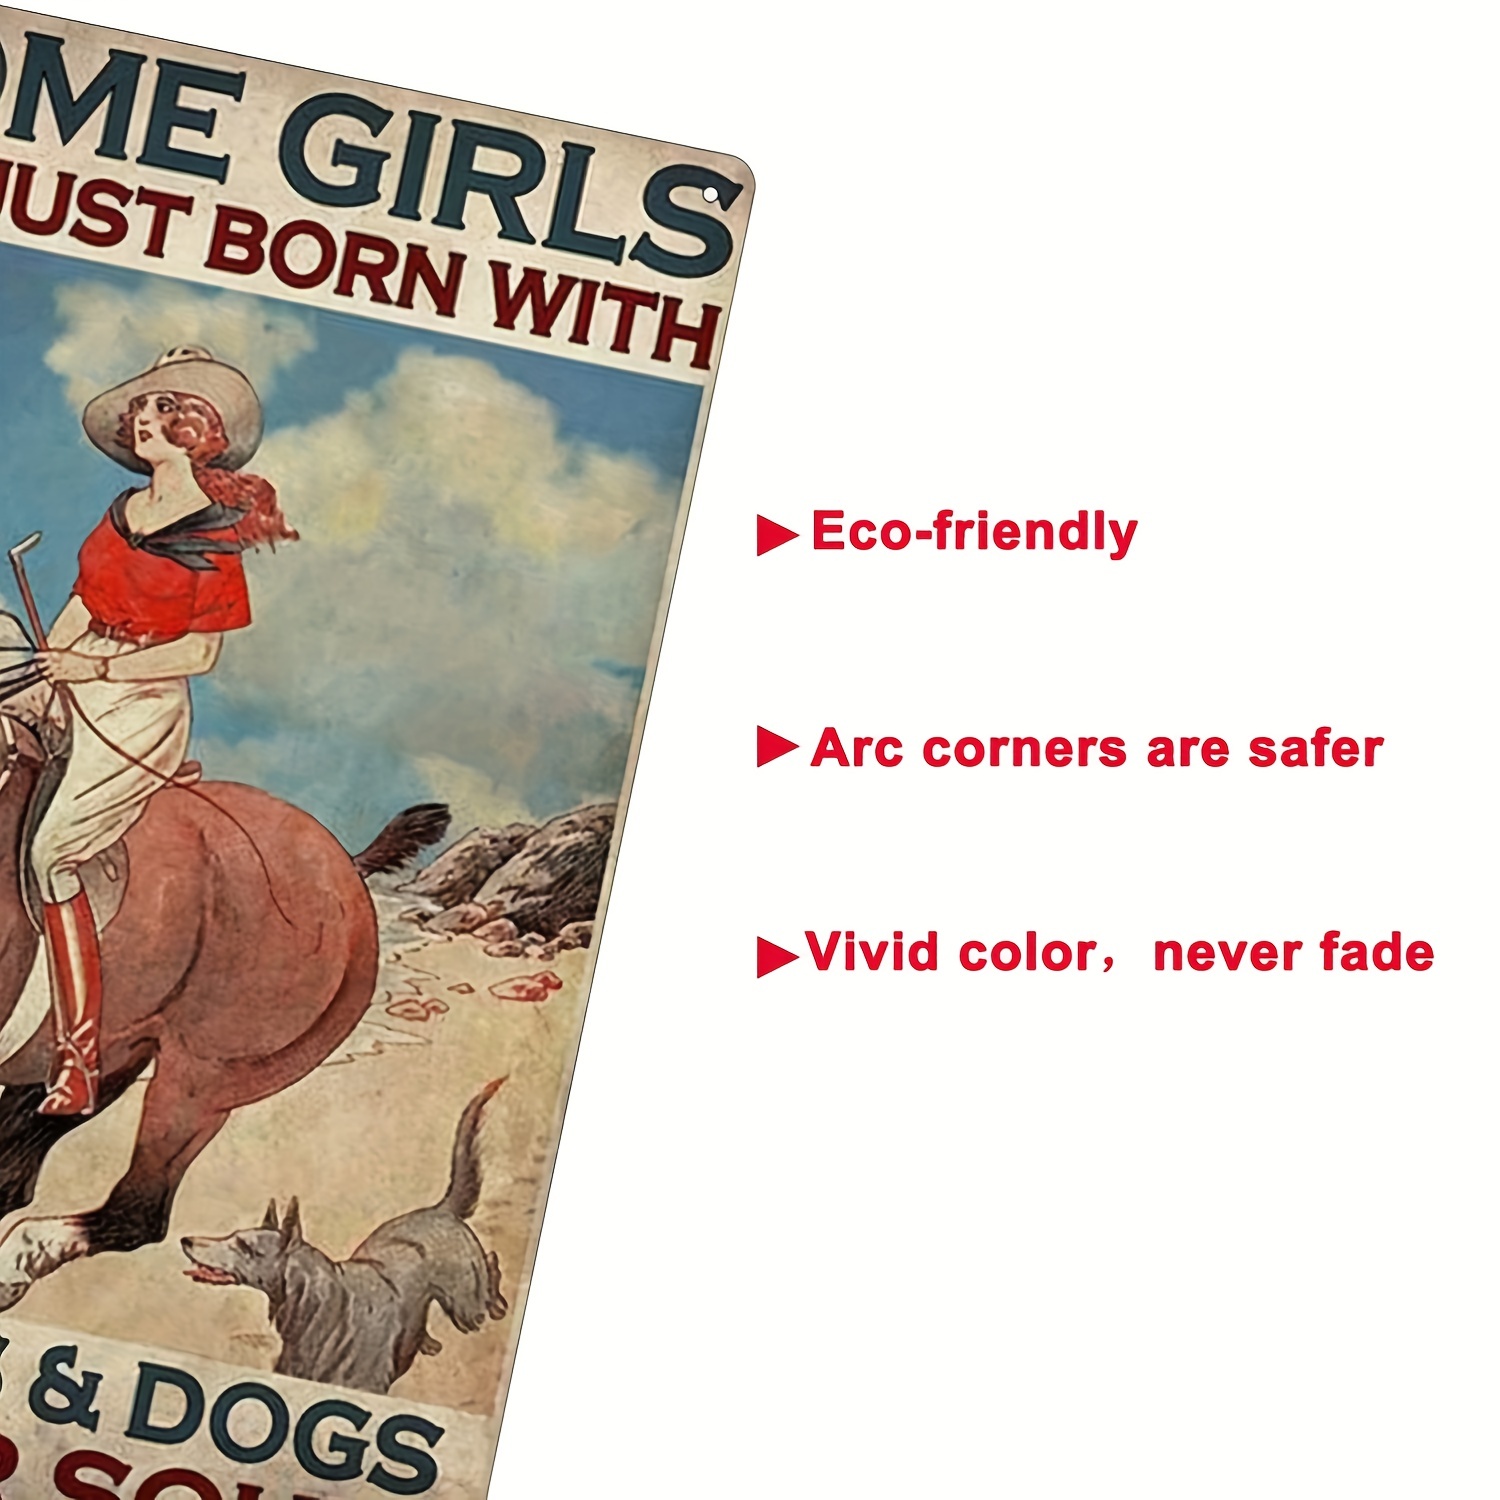 Metal Tin Sign Of Girls Art Style,Some Girls Are Just Born Retro